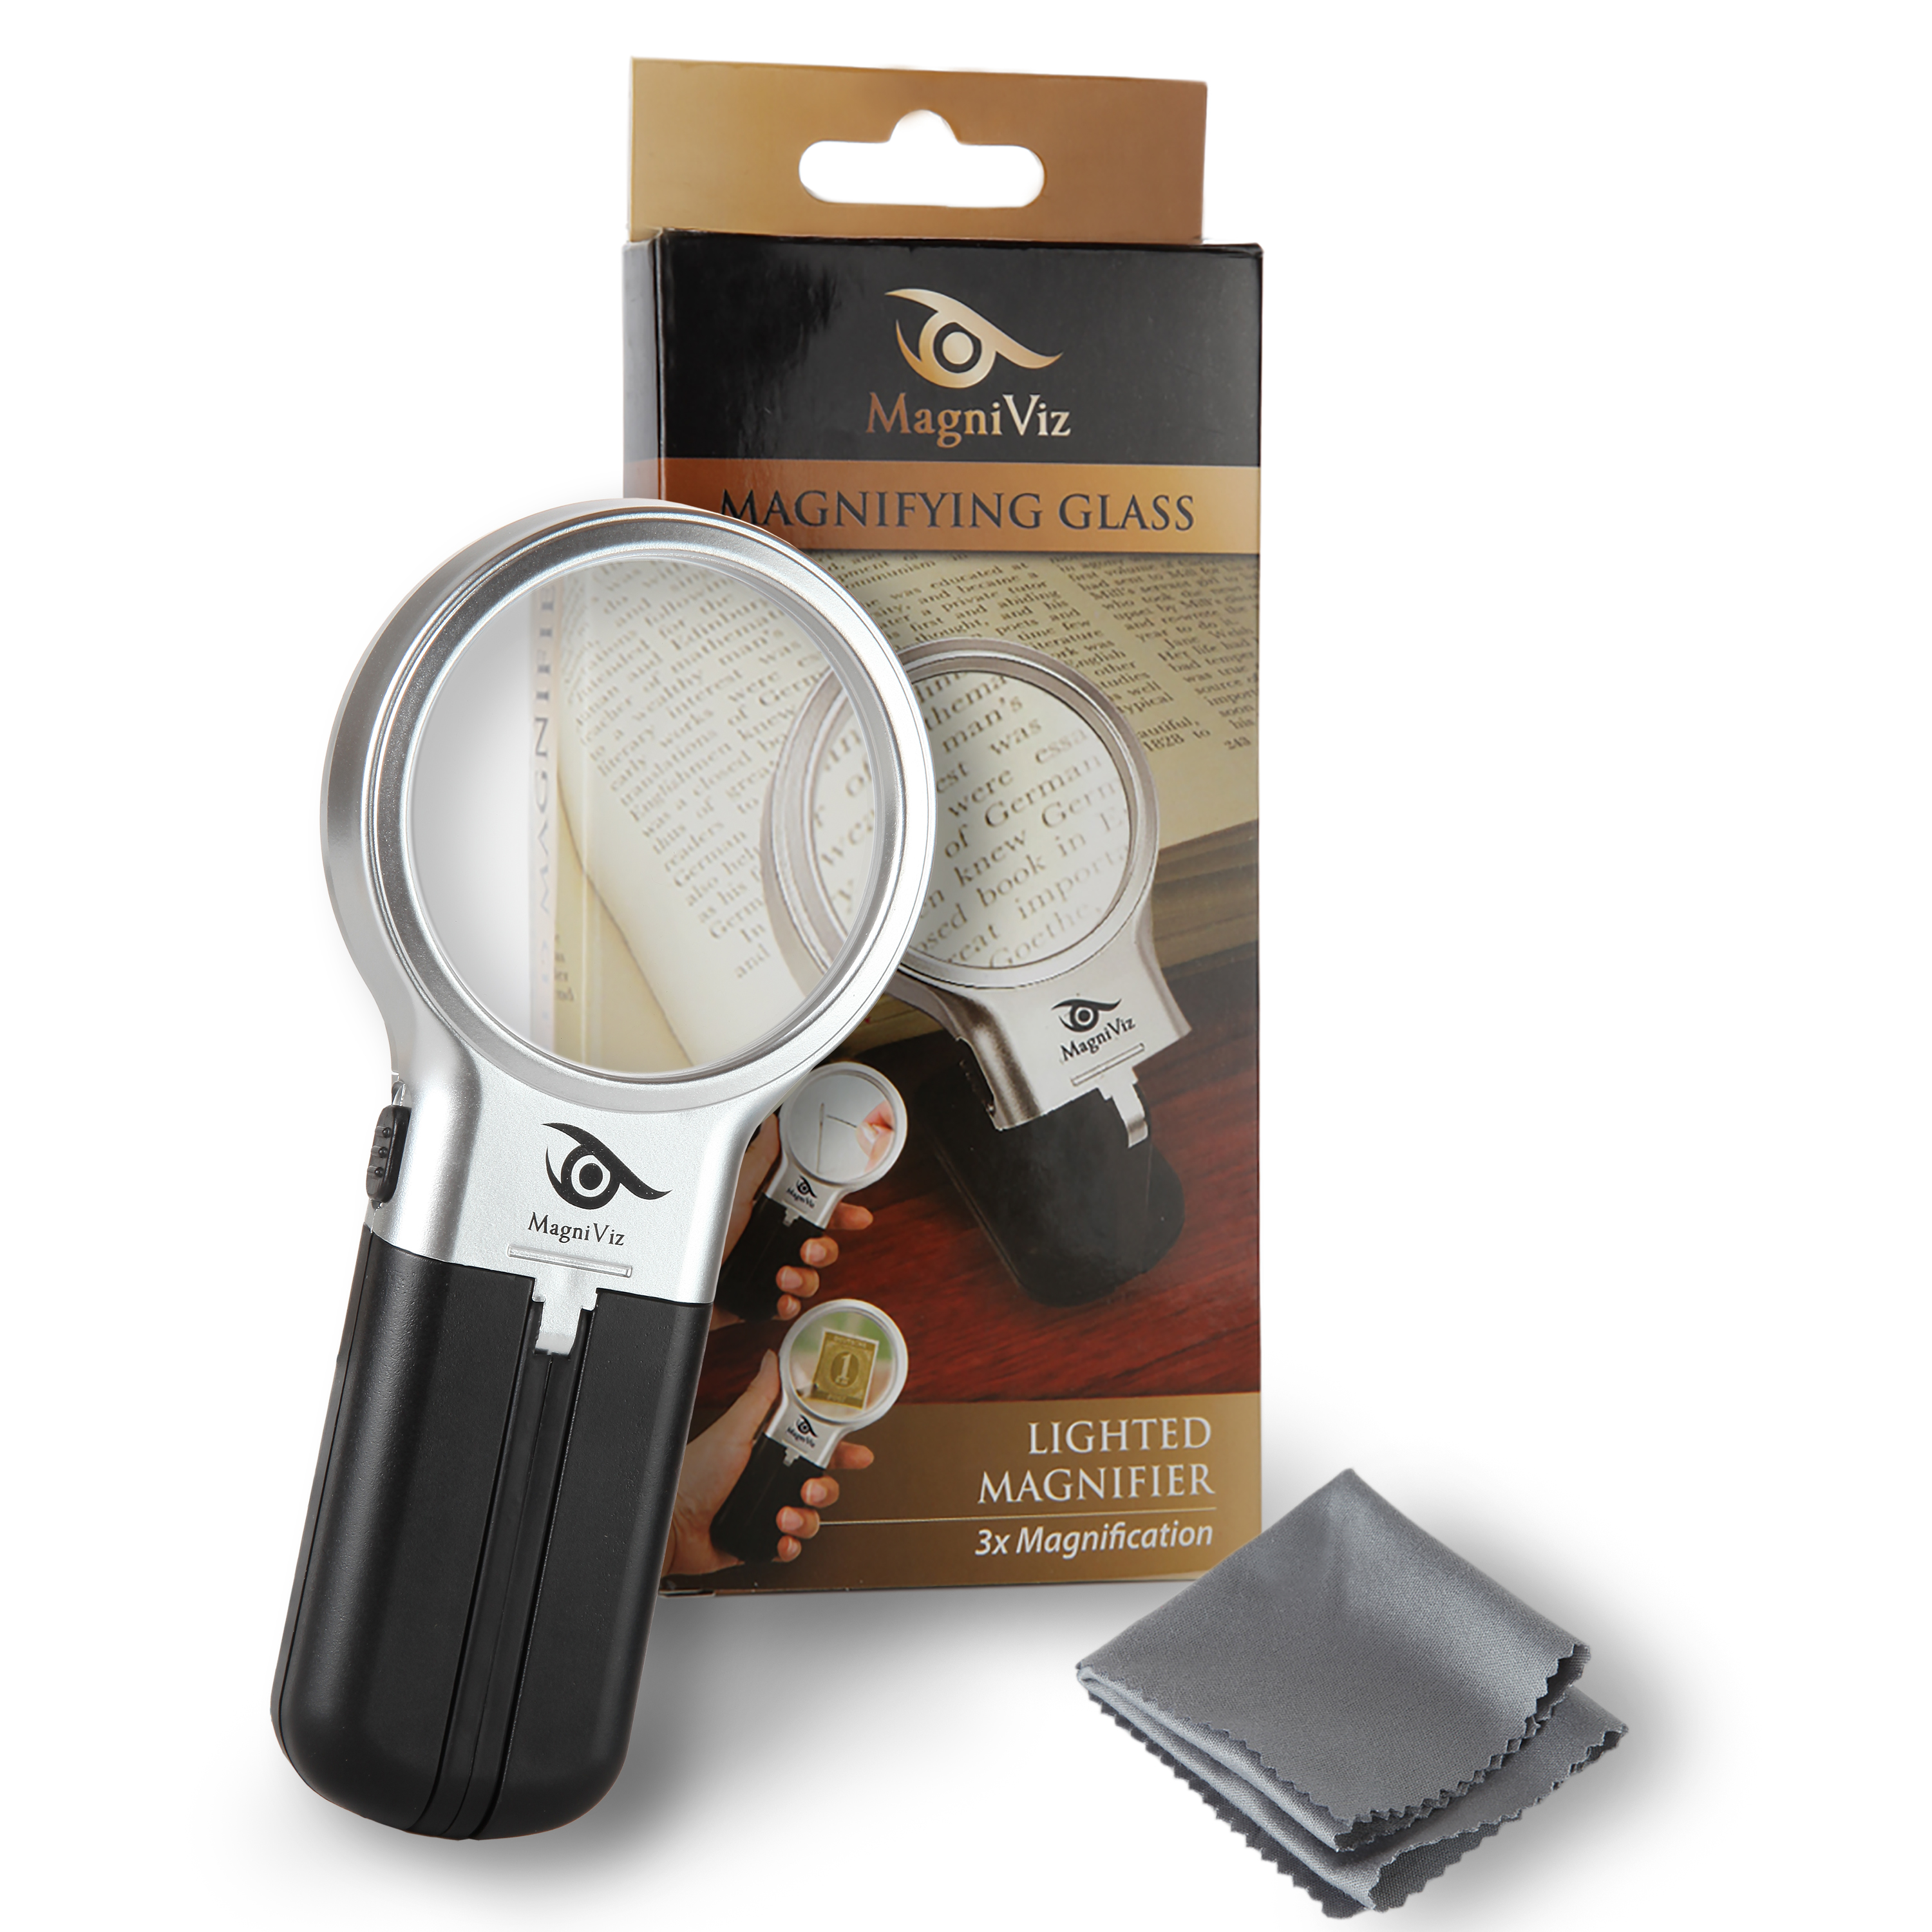 MagniViz with packaging and cleaning cloth